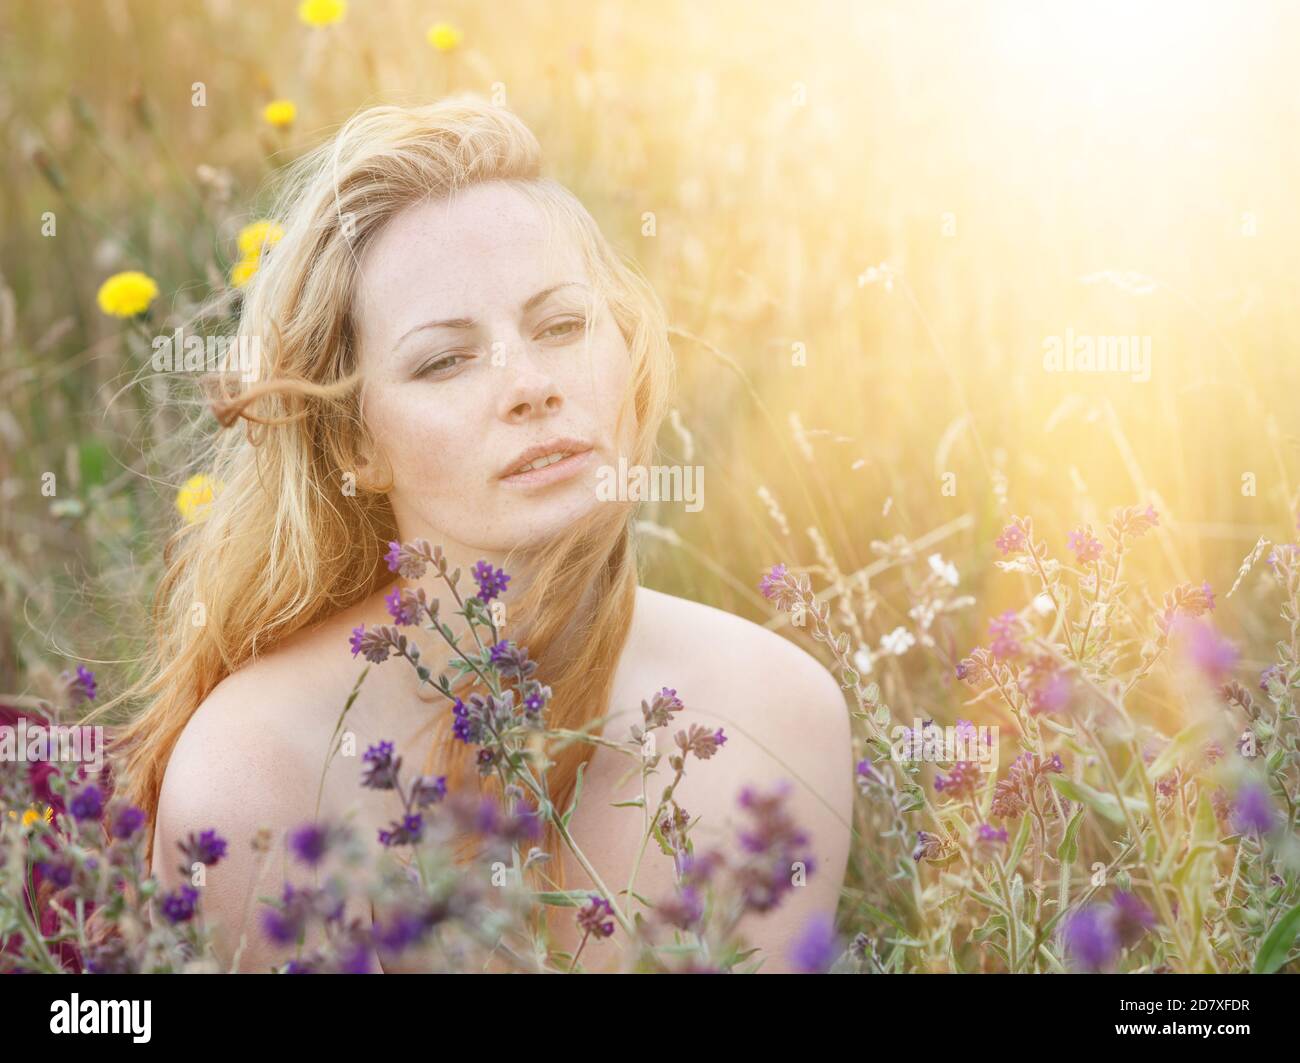 Artistic portrait of freckled woman on natural background. Young woman enjoying nature among the flowers and grass. Close up summer portrait Stock Photo